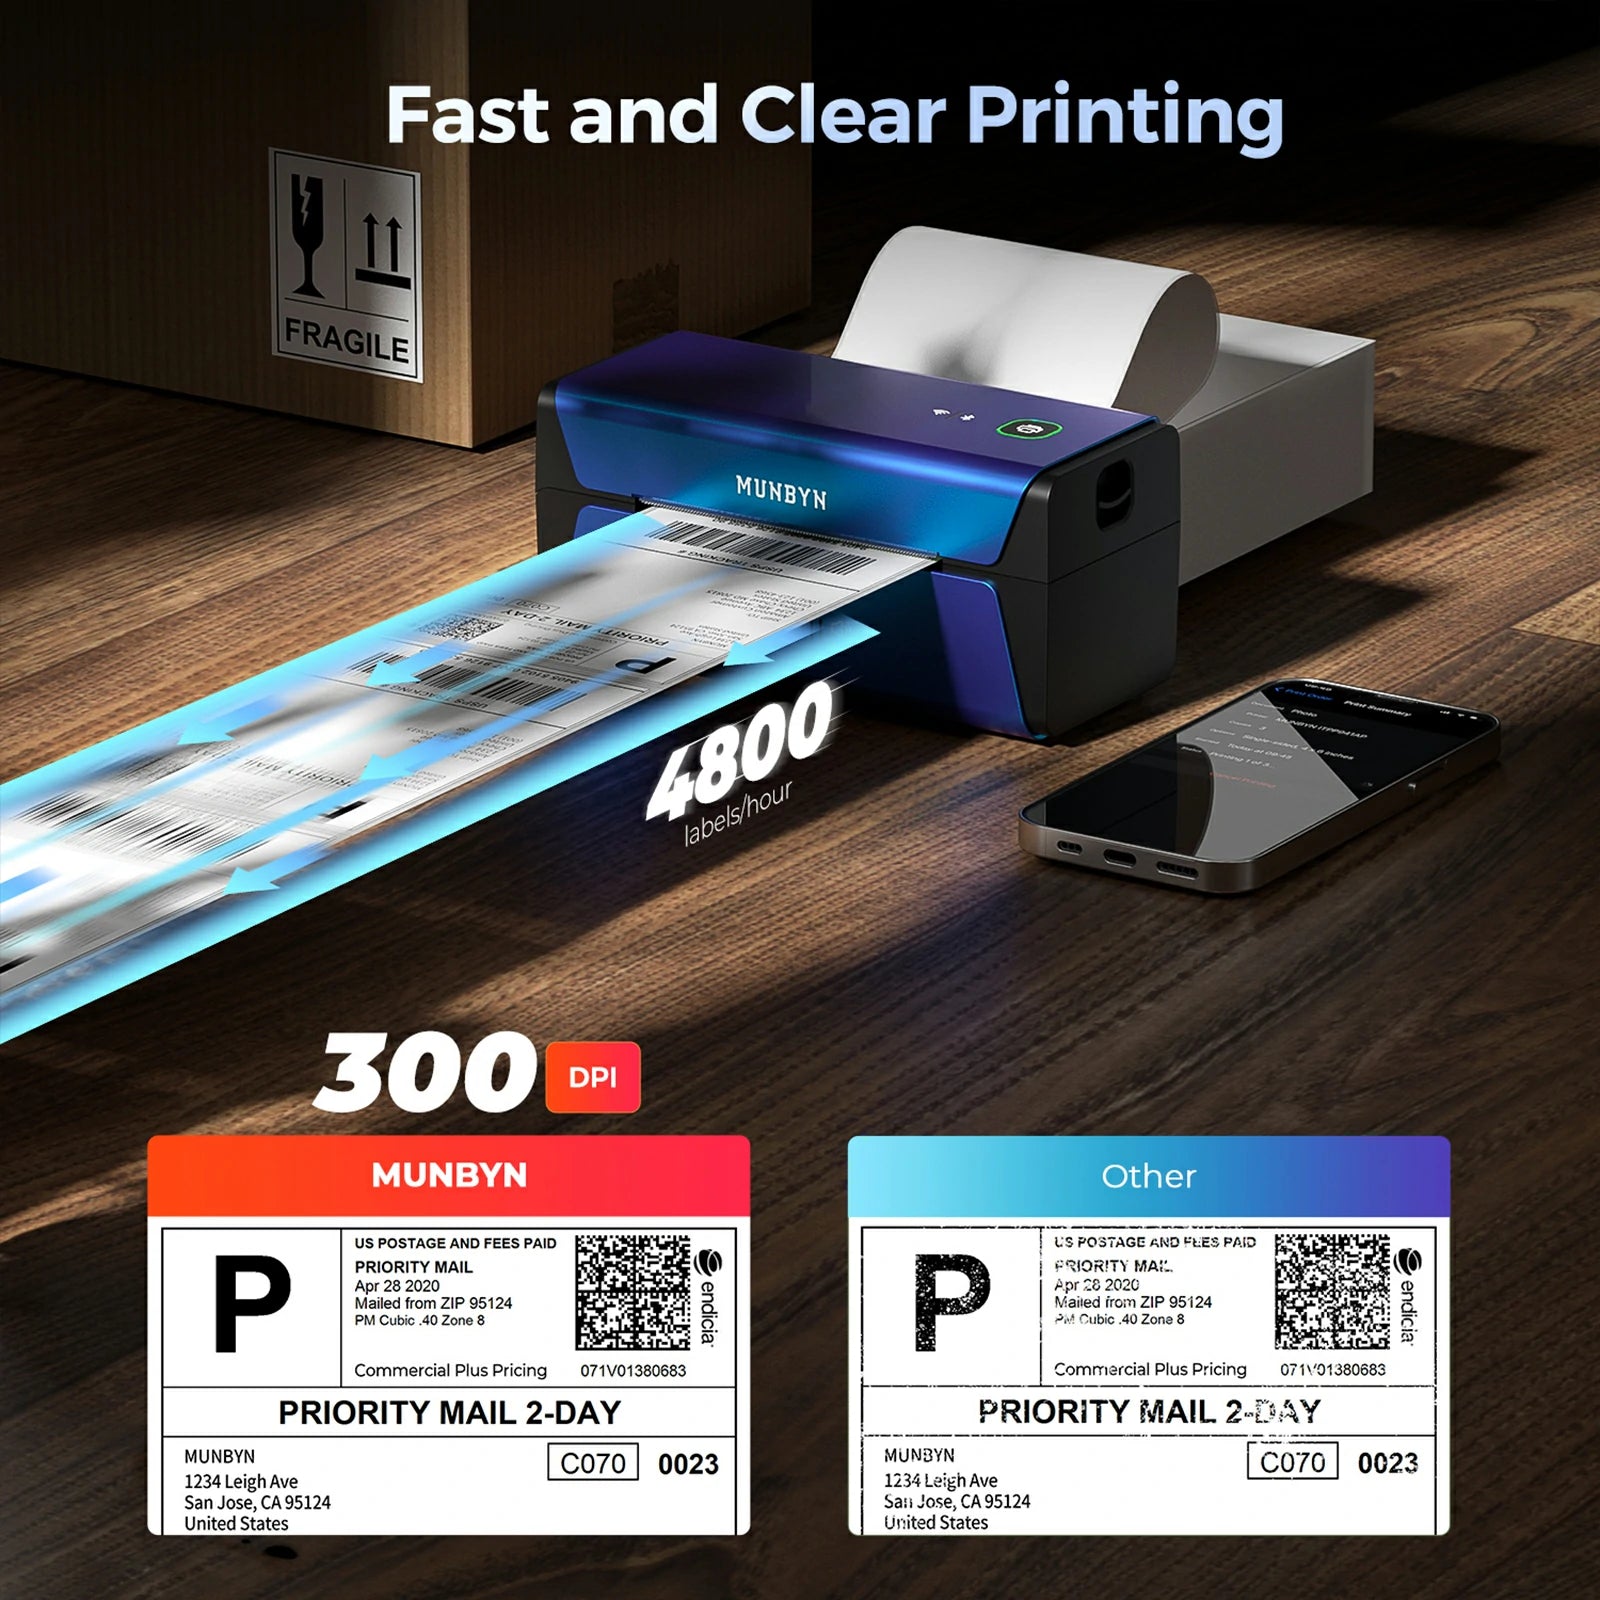 With a resolution of 300 DPI, the printer can produce up to 4800 labels per hour and handle label widths ranging from 1.57" to 4.3".